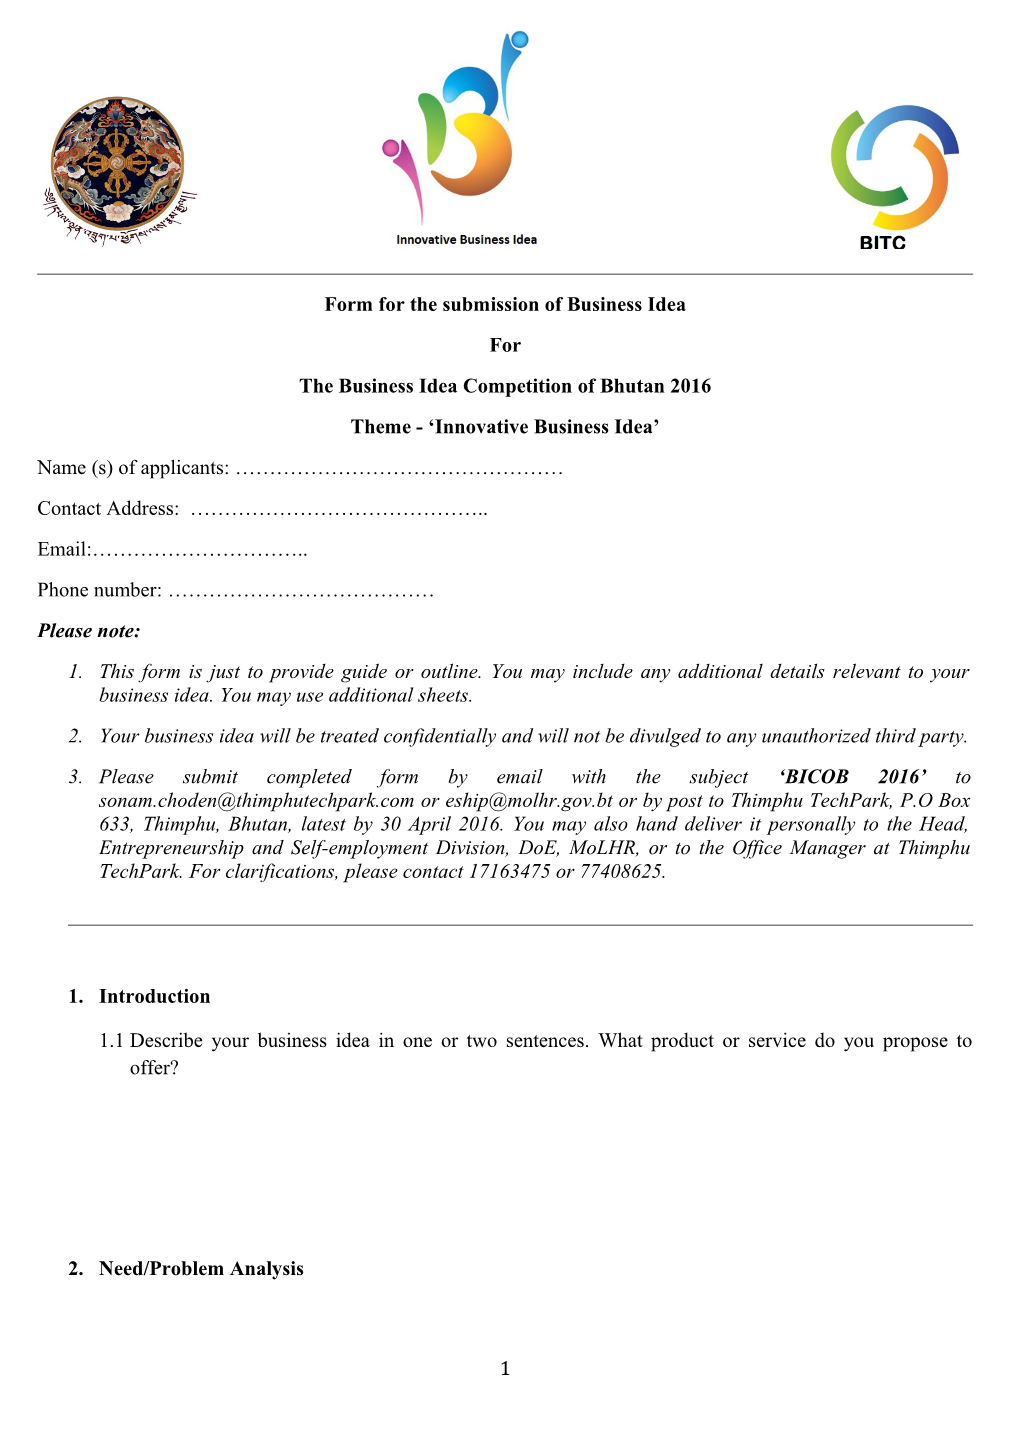 Form for the Submission of Business Idea s1